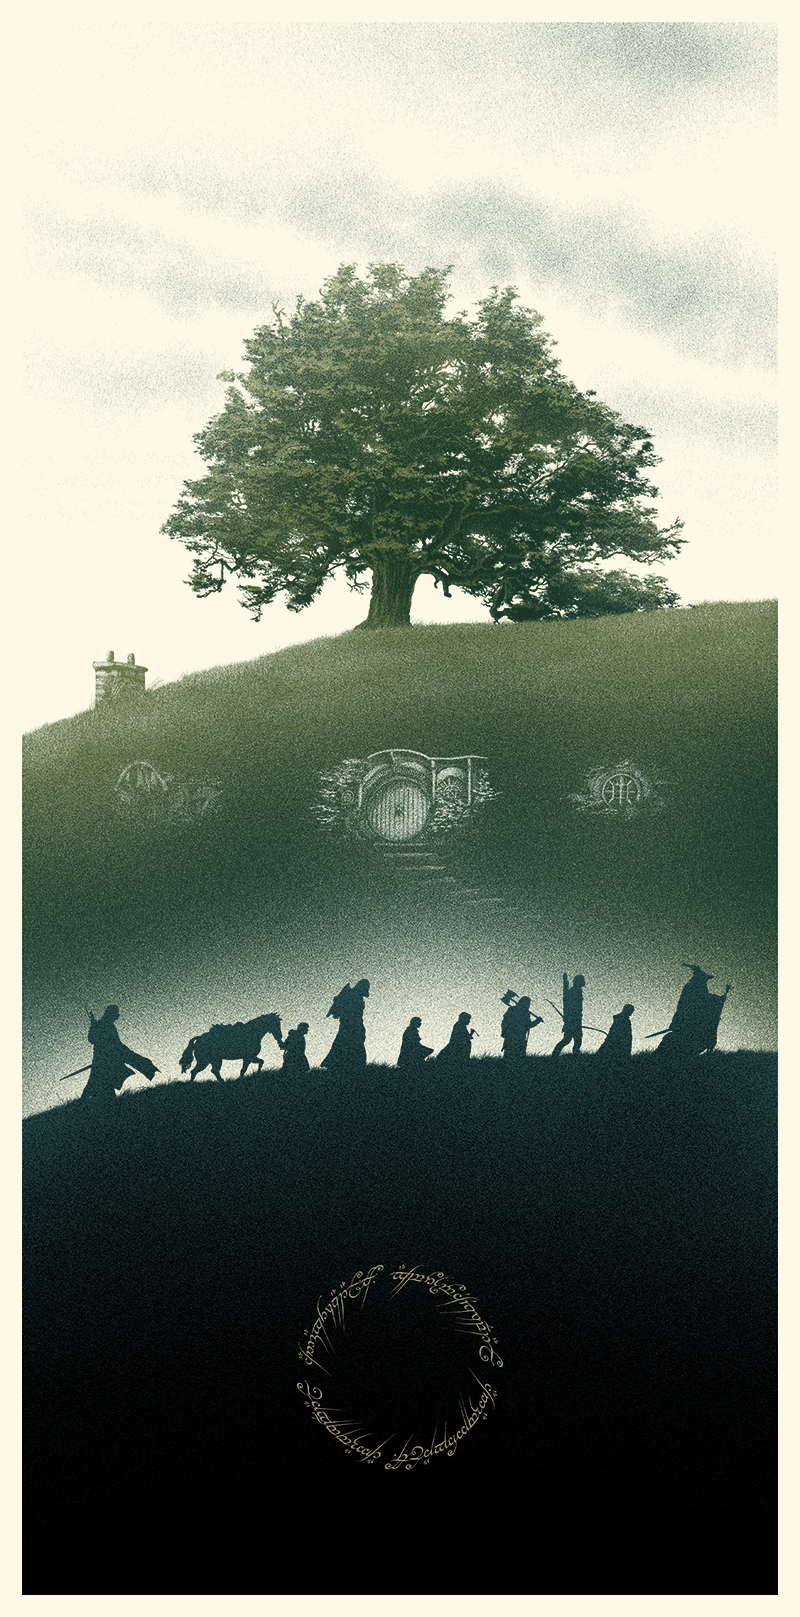 Marko-Manev-The-Fellowship-of-the-Ring